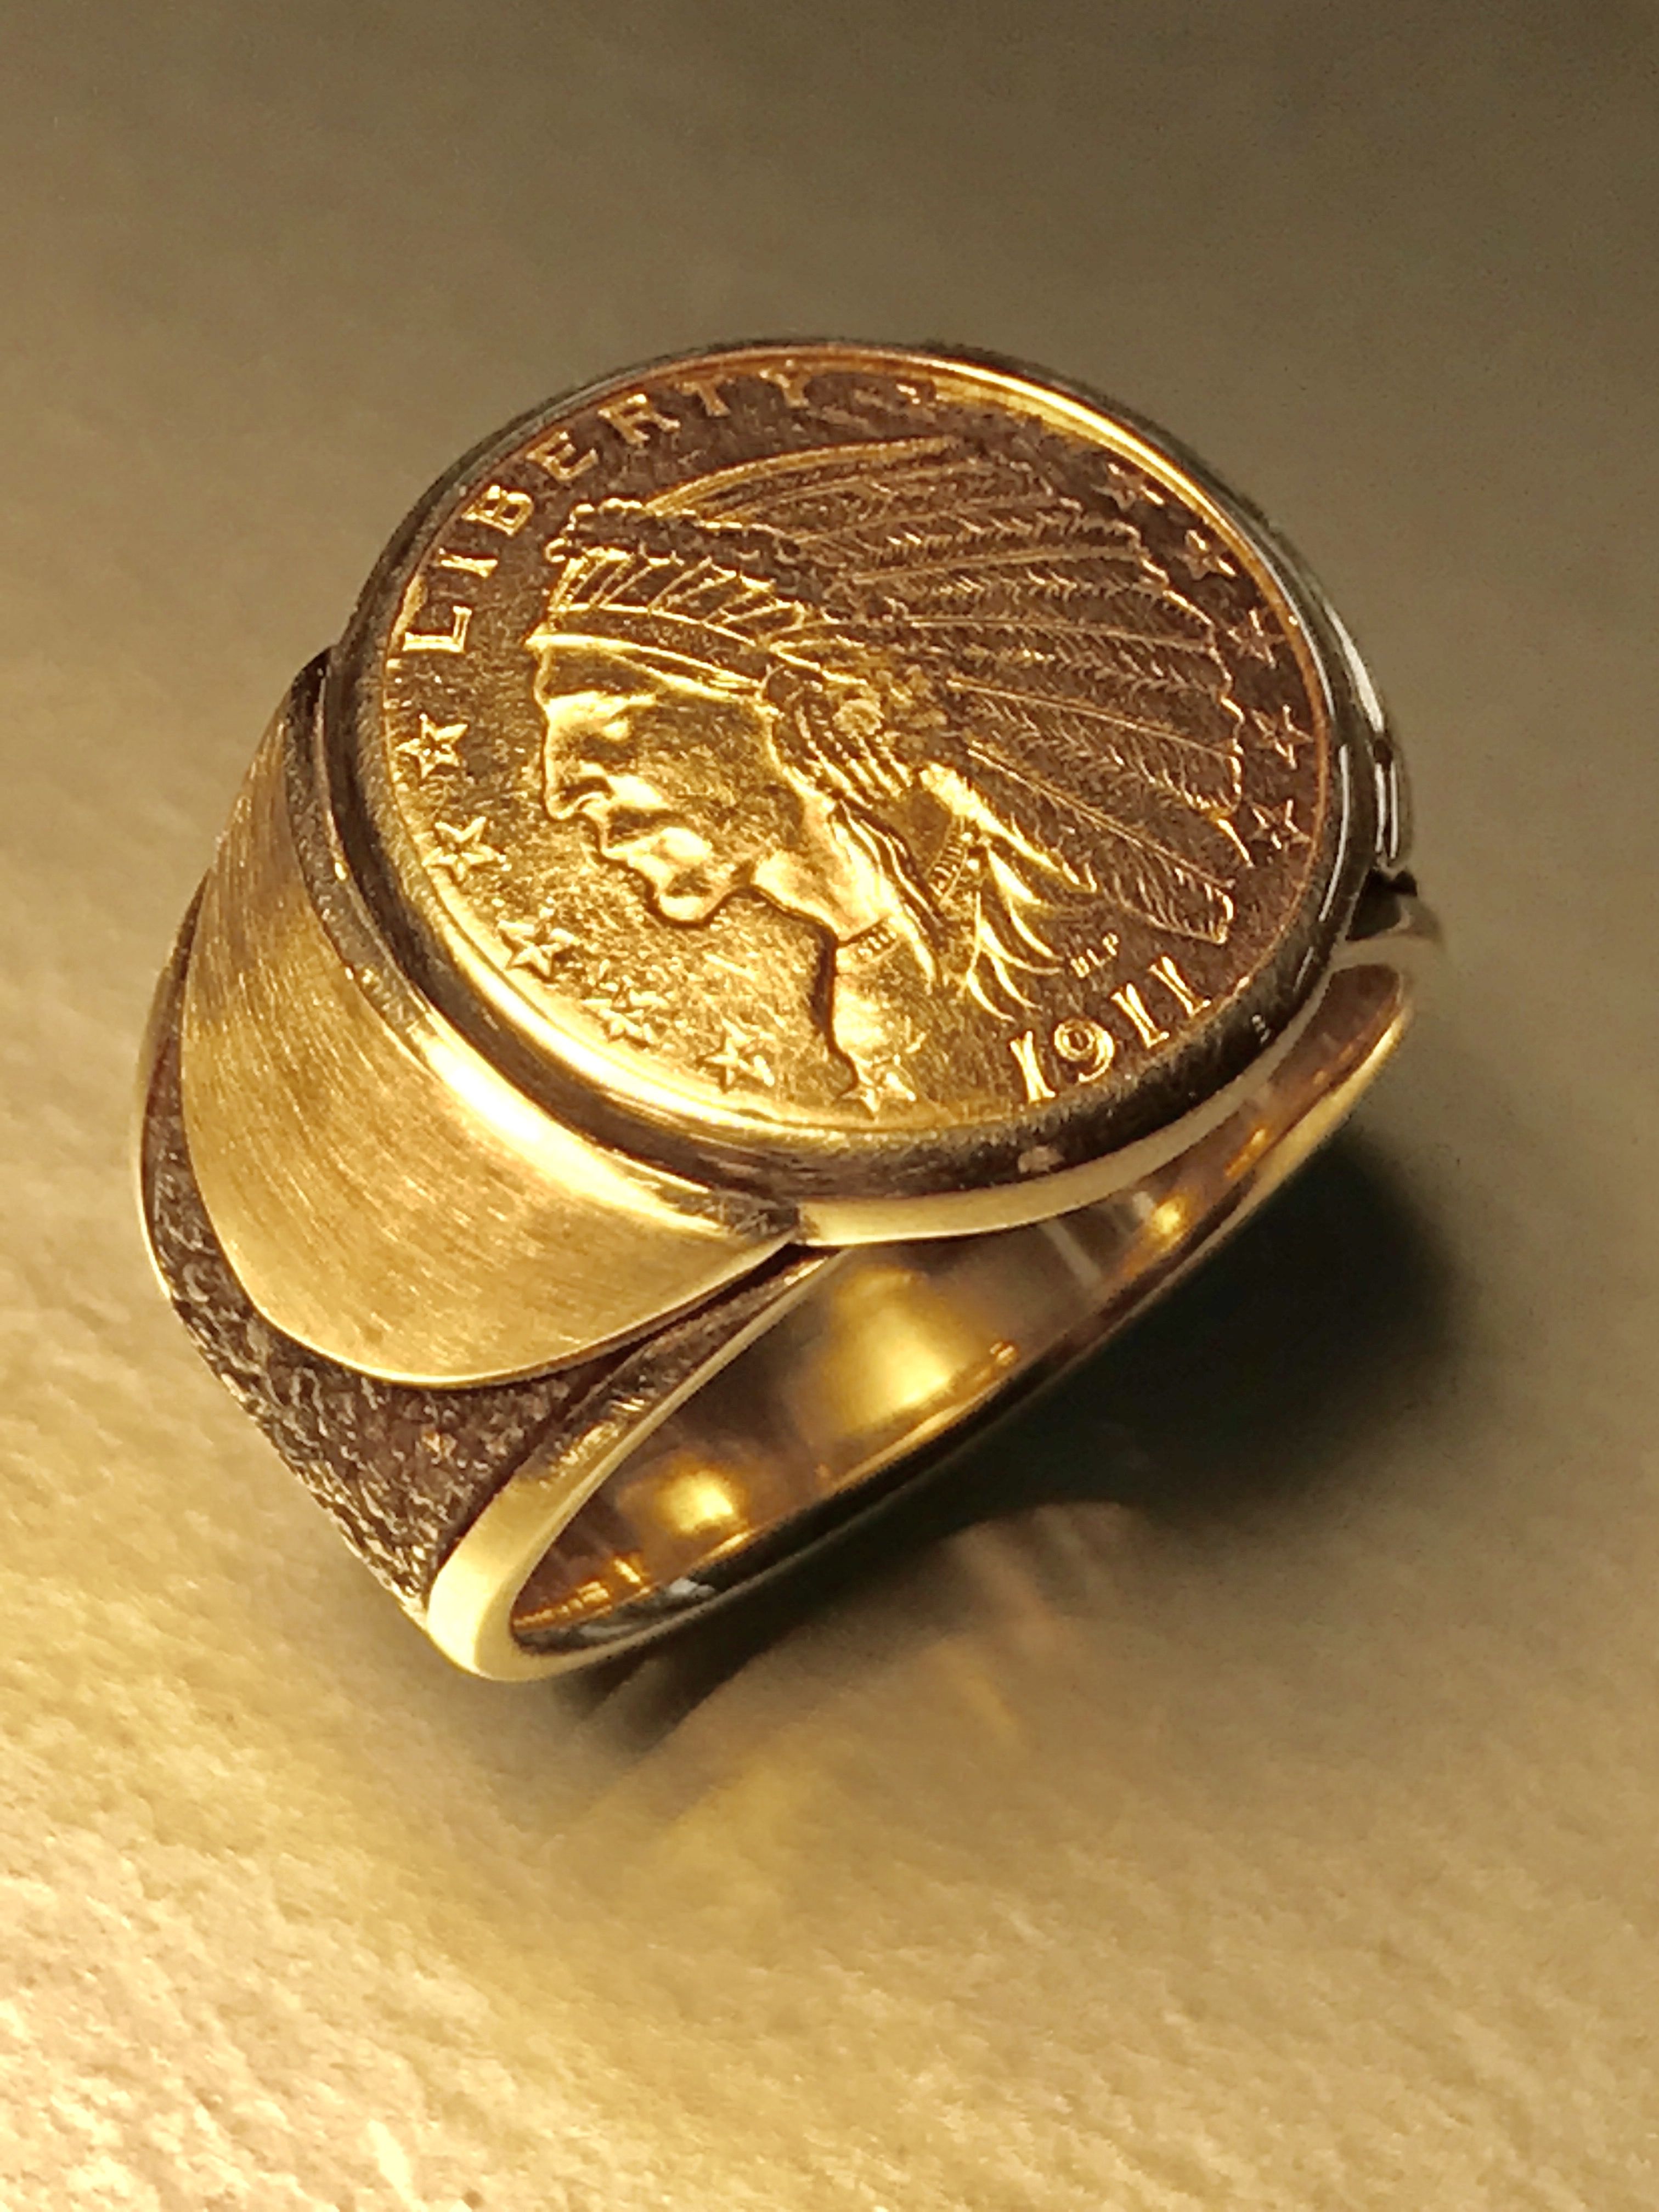 Buy a Hand Made Custom Made Mens Gold Coin Ring, made to order from